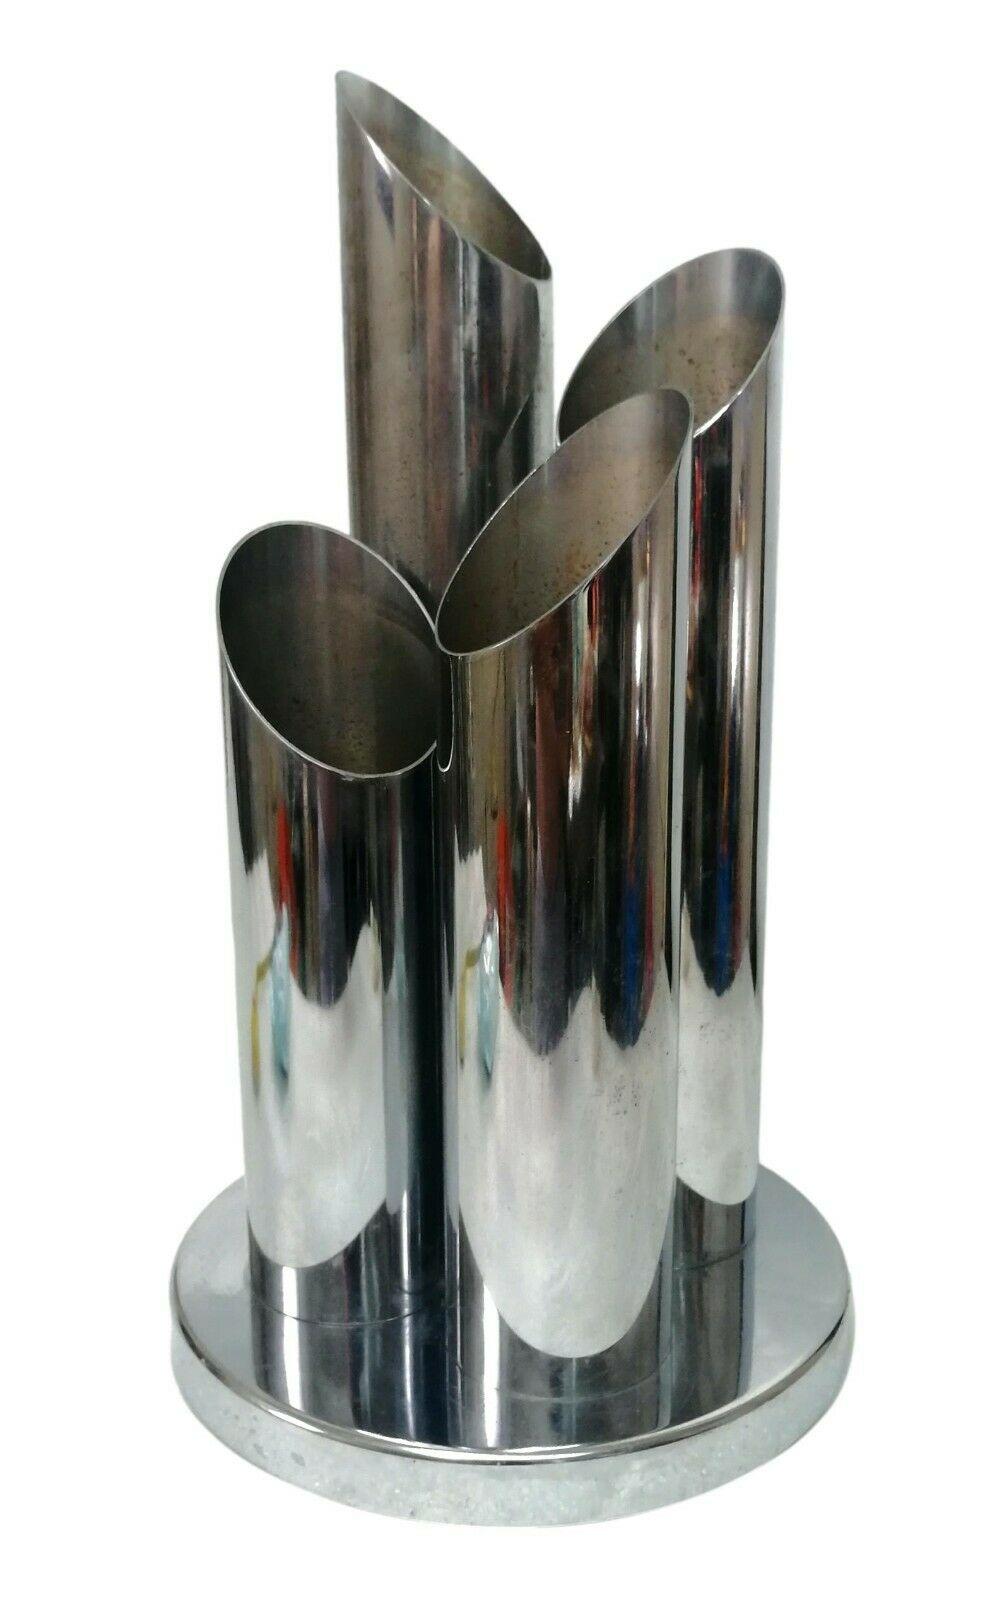 splendid table lamp with four lights in chromed metal, sciolari production

chromed steel base and four chromed metal tower tubes, of different heights, with as many lamp holders

it measures 25 cm in diameter at the base and just under 50 cm in